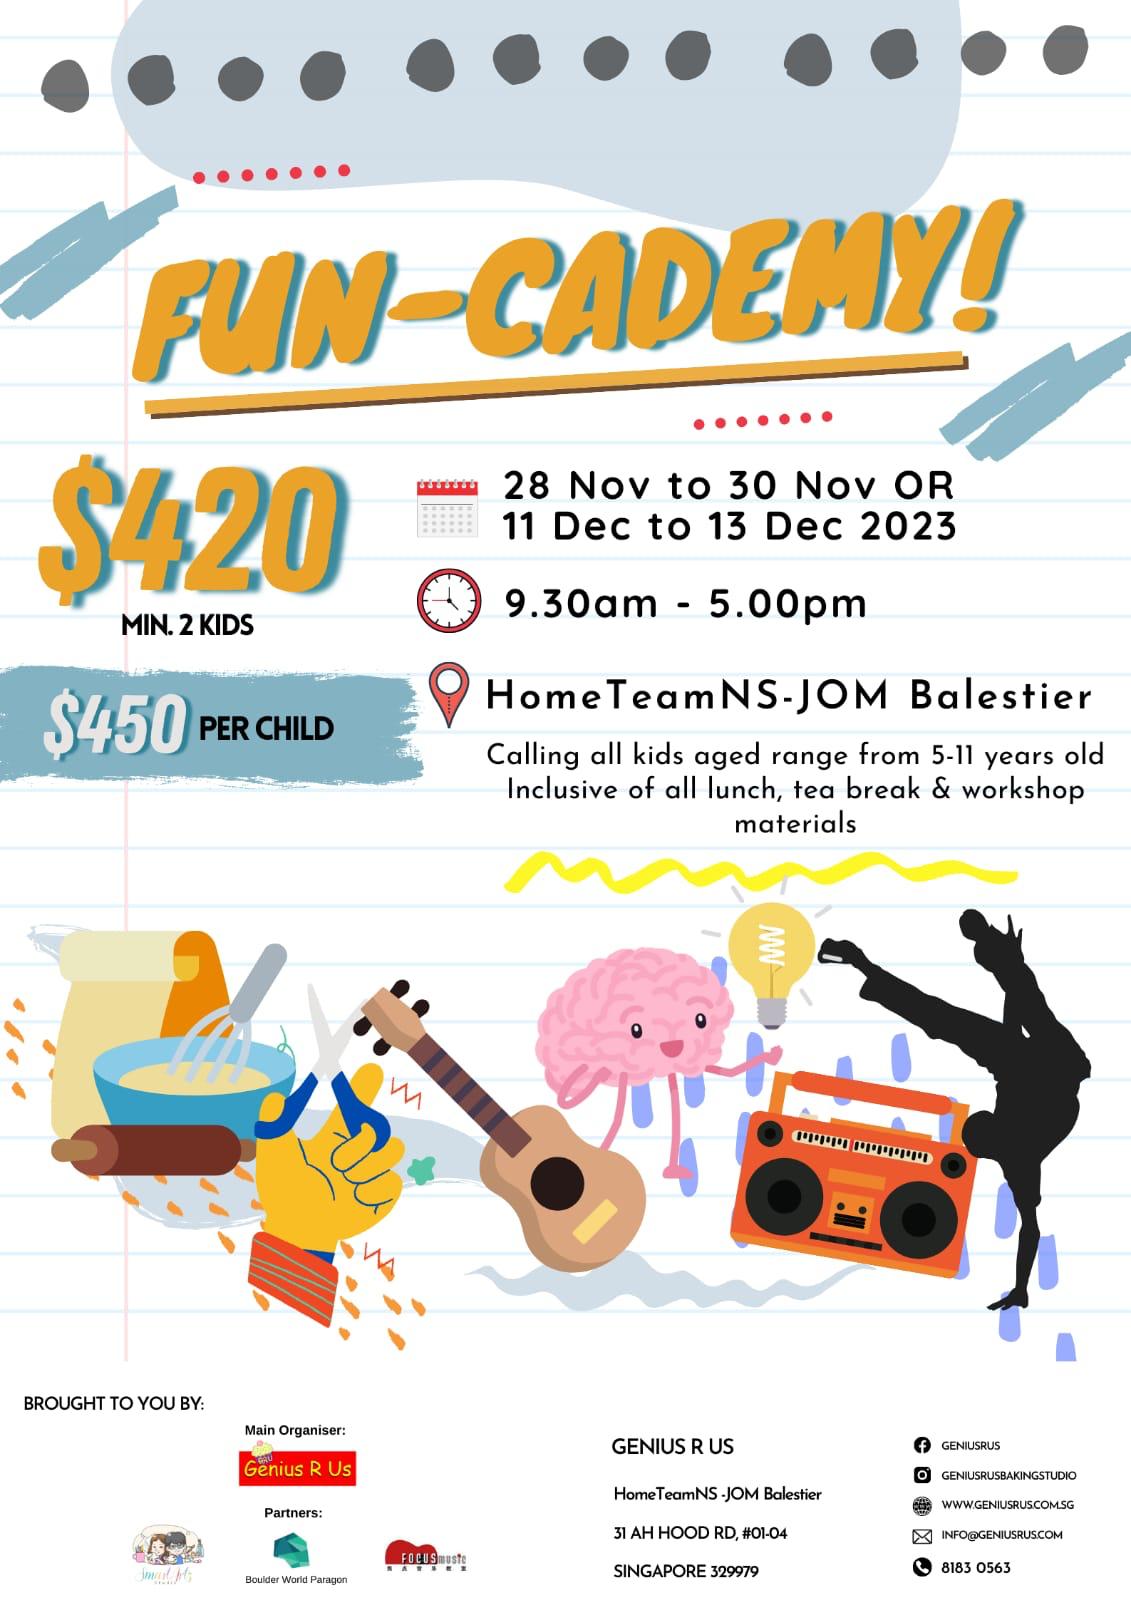 Fun-cademy: 3 Days Year-end Holiday Camp (Bake, Craft, Music and Fun for 5 - 11 Year Old)